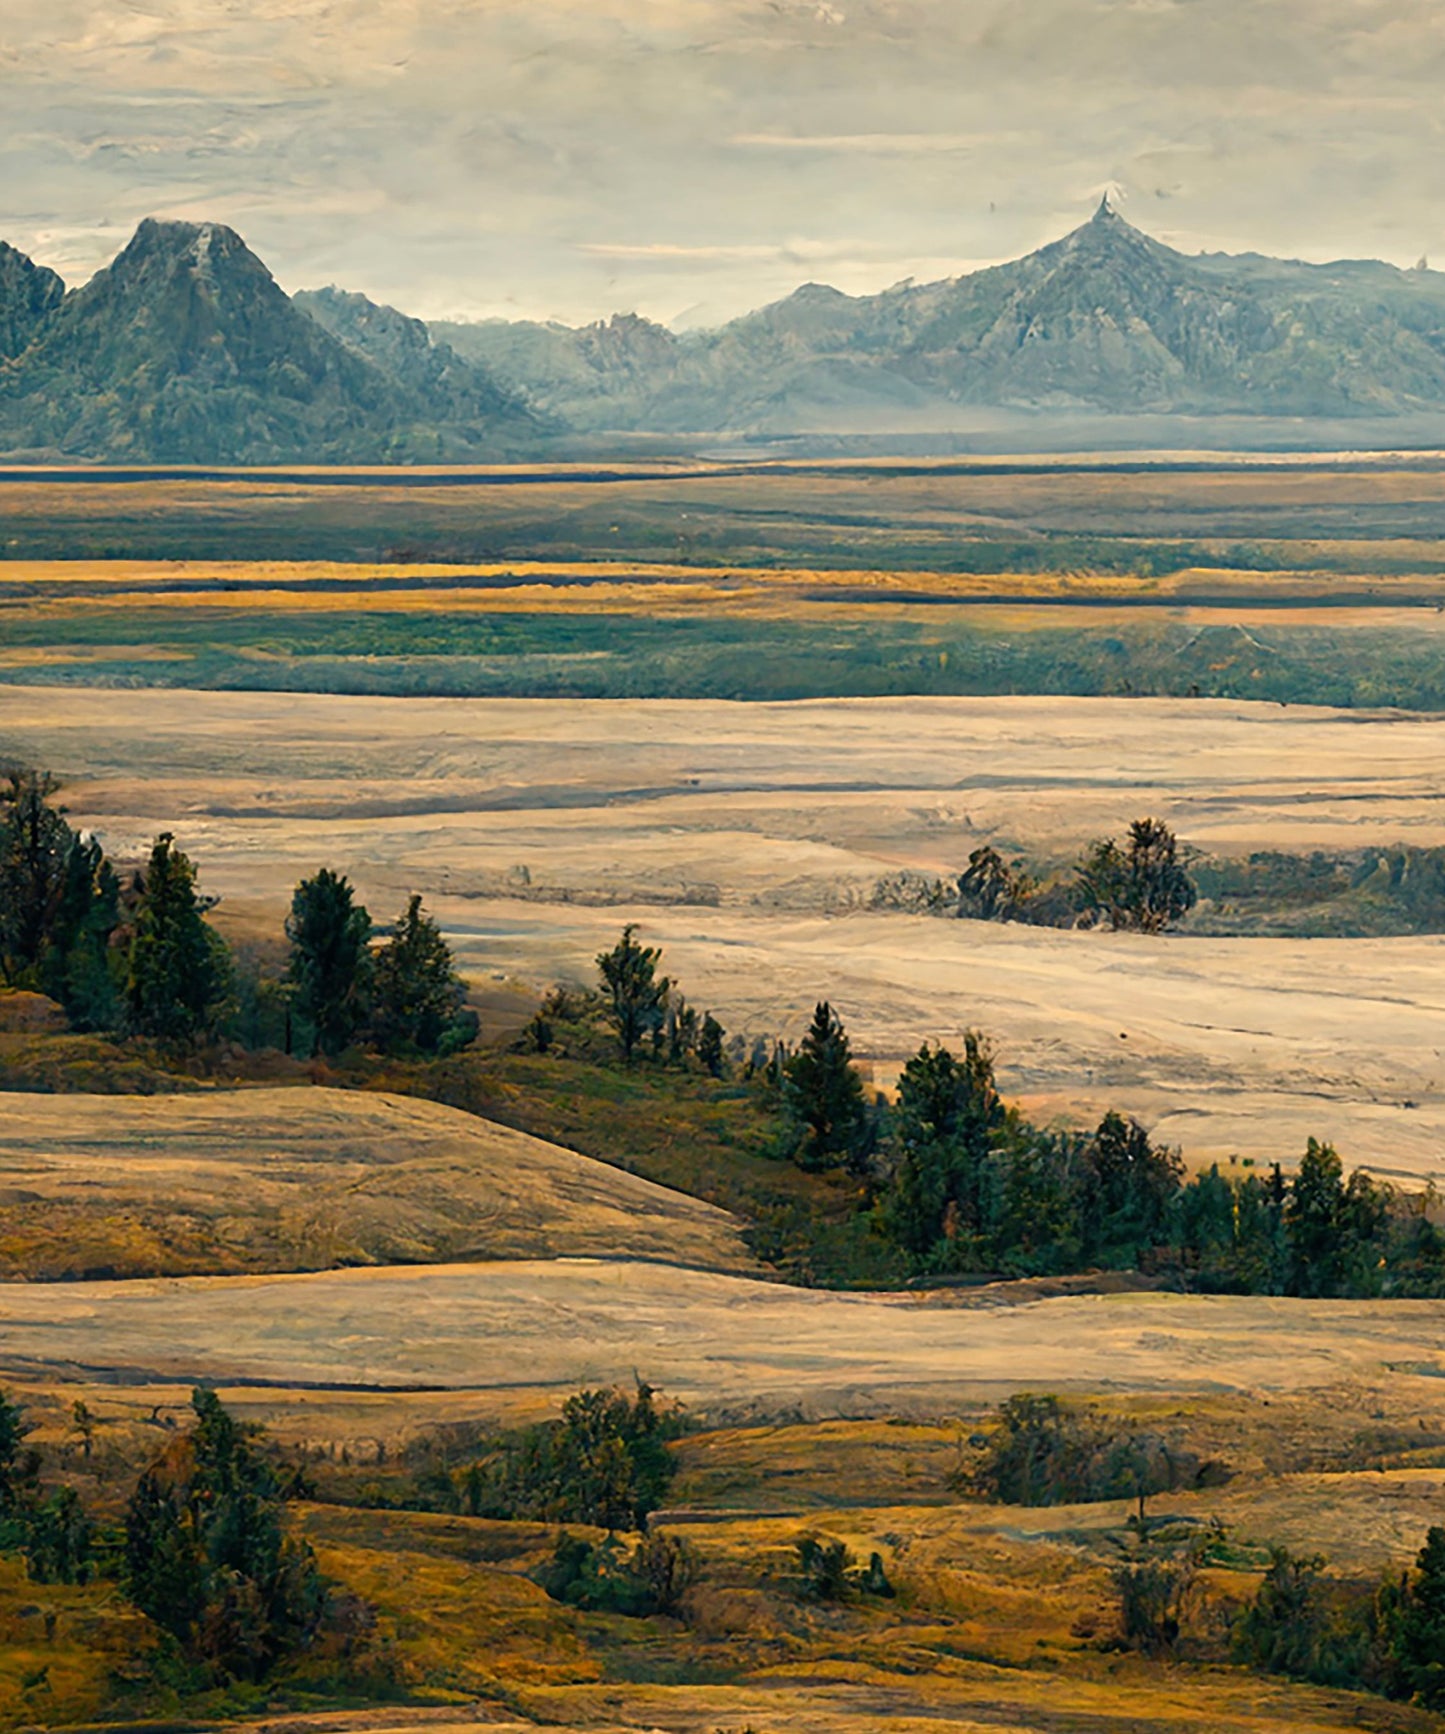 Wild West Landscapes #4 of 6 - Montana